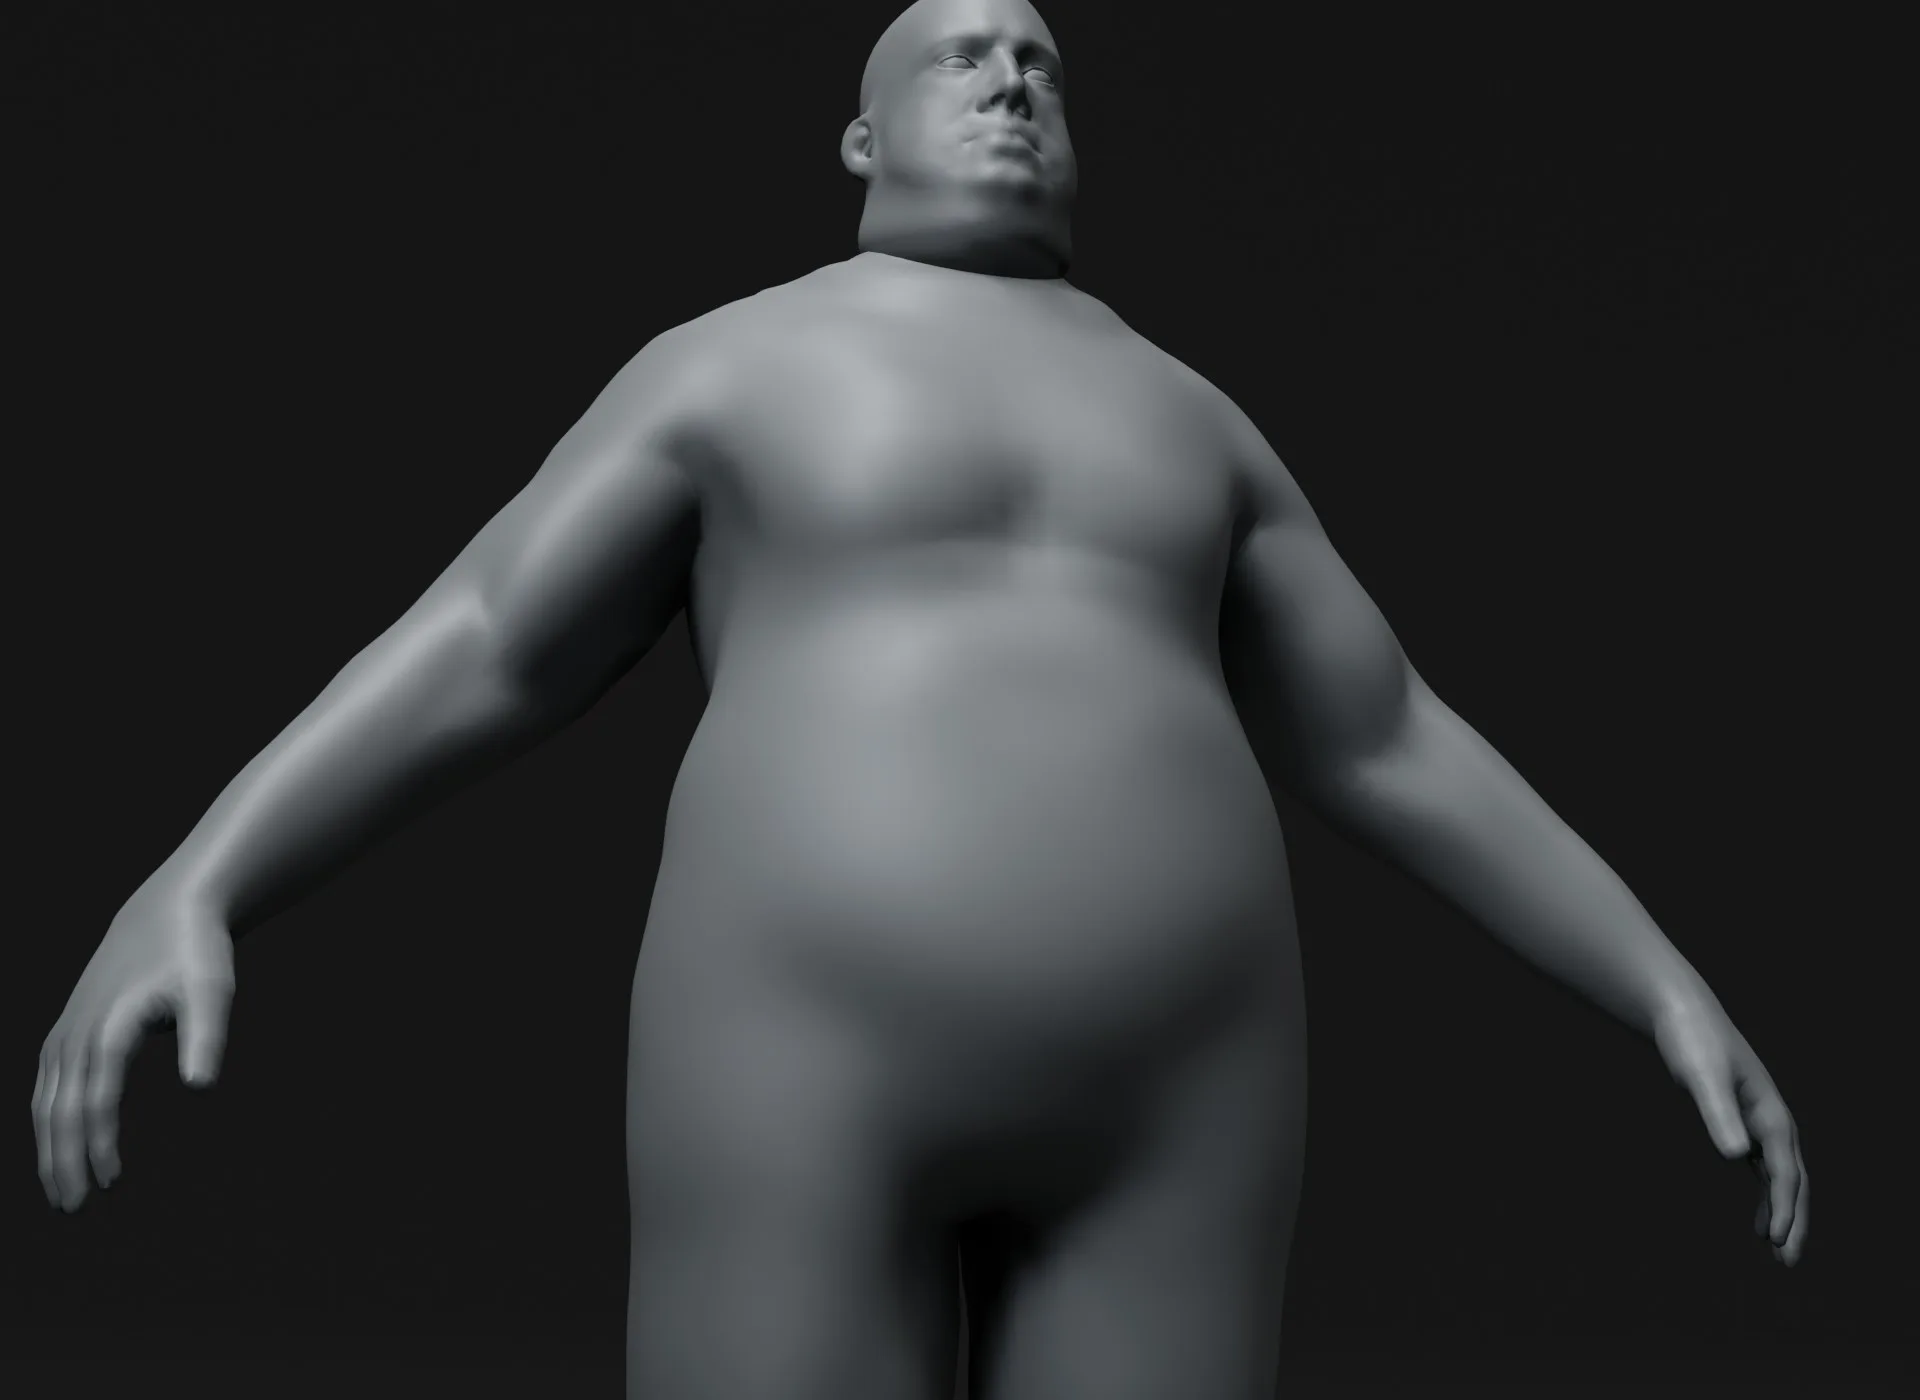 Male Body Fat Base Mesh Animated and Rigged 3D Model 20k Polygons